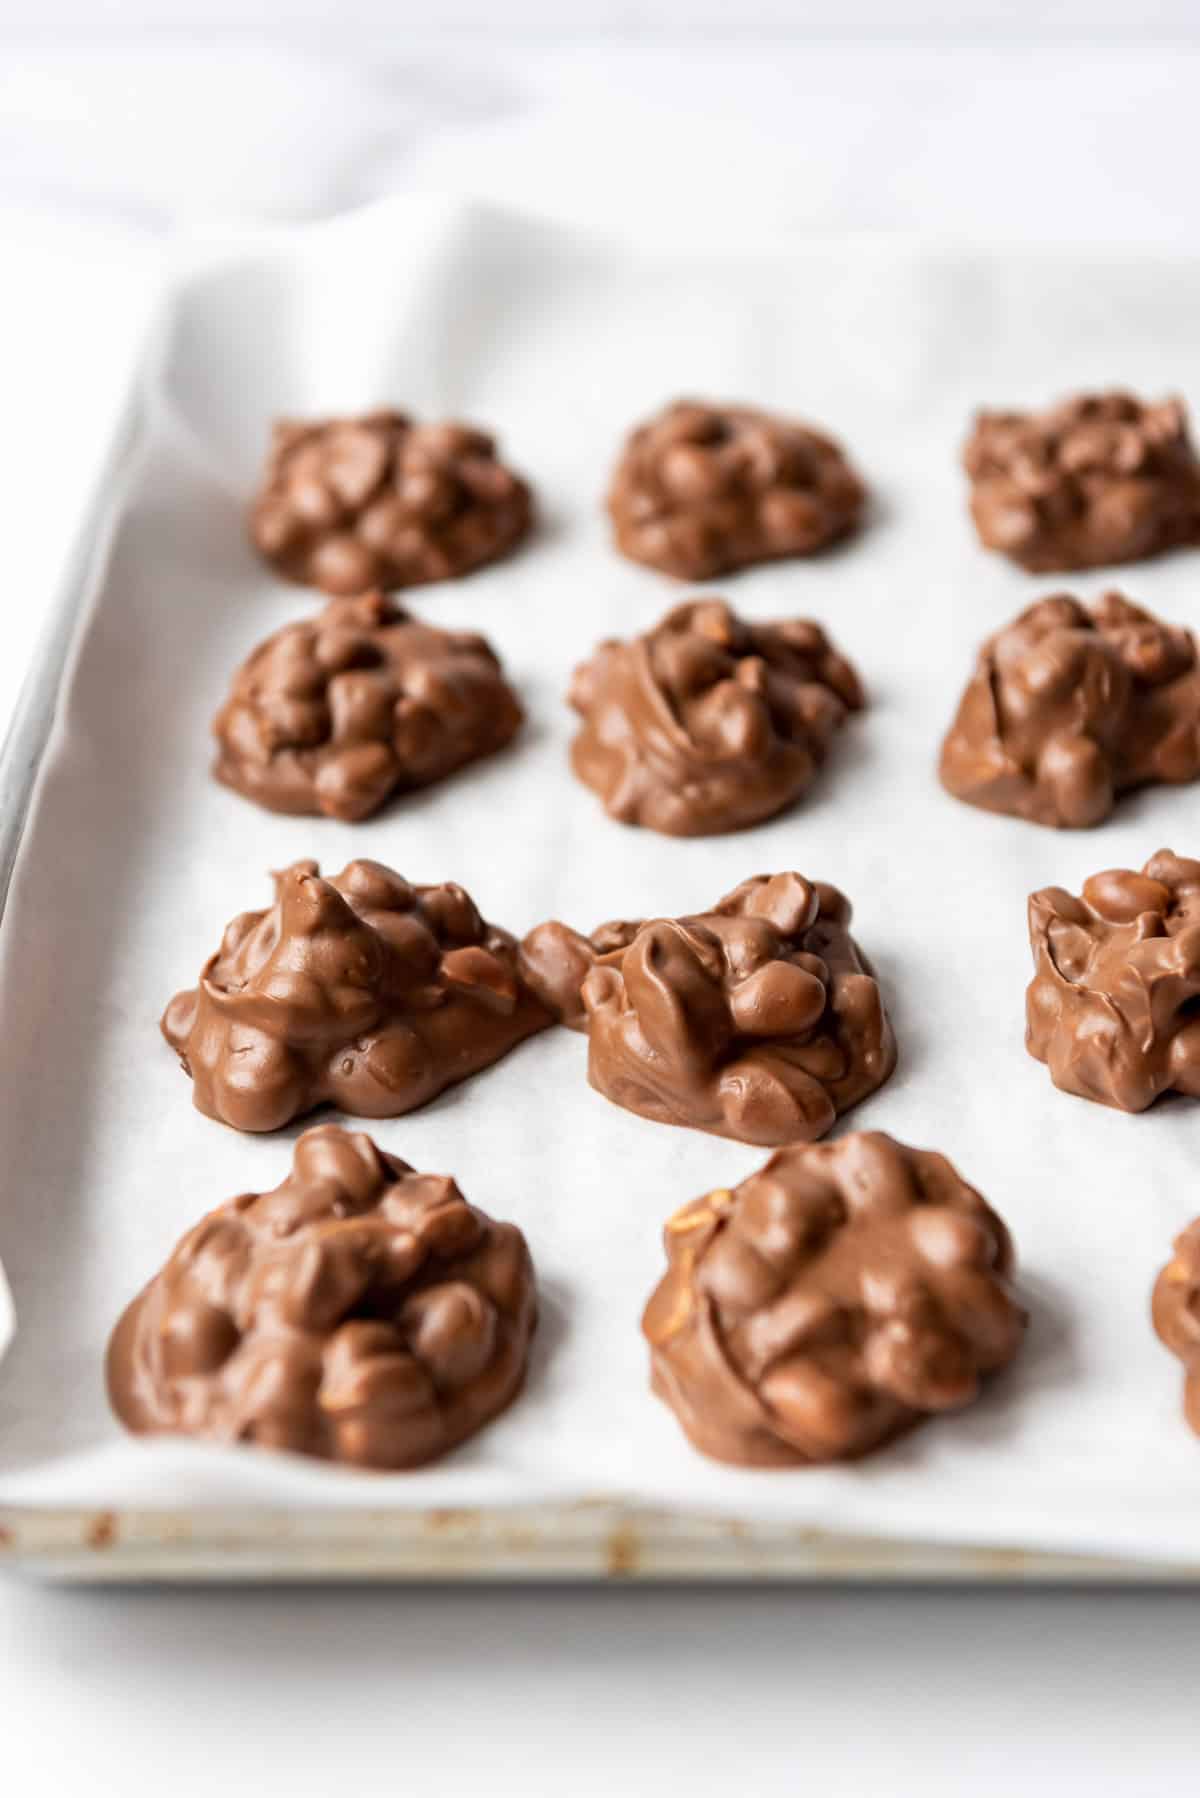 Peanut clusters cooling on a baking sheet.